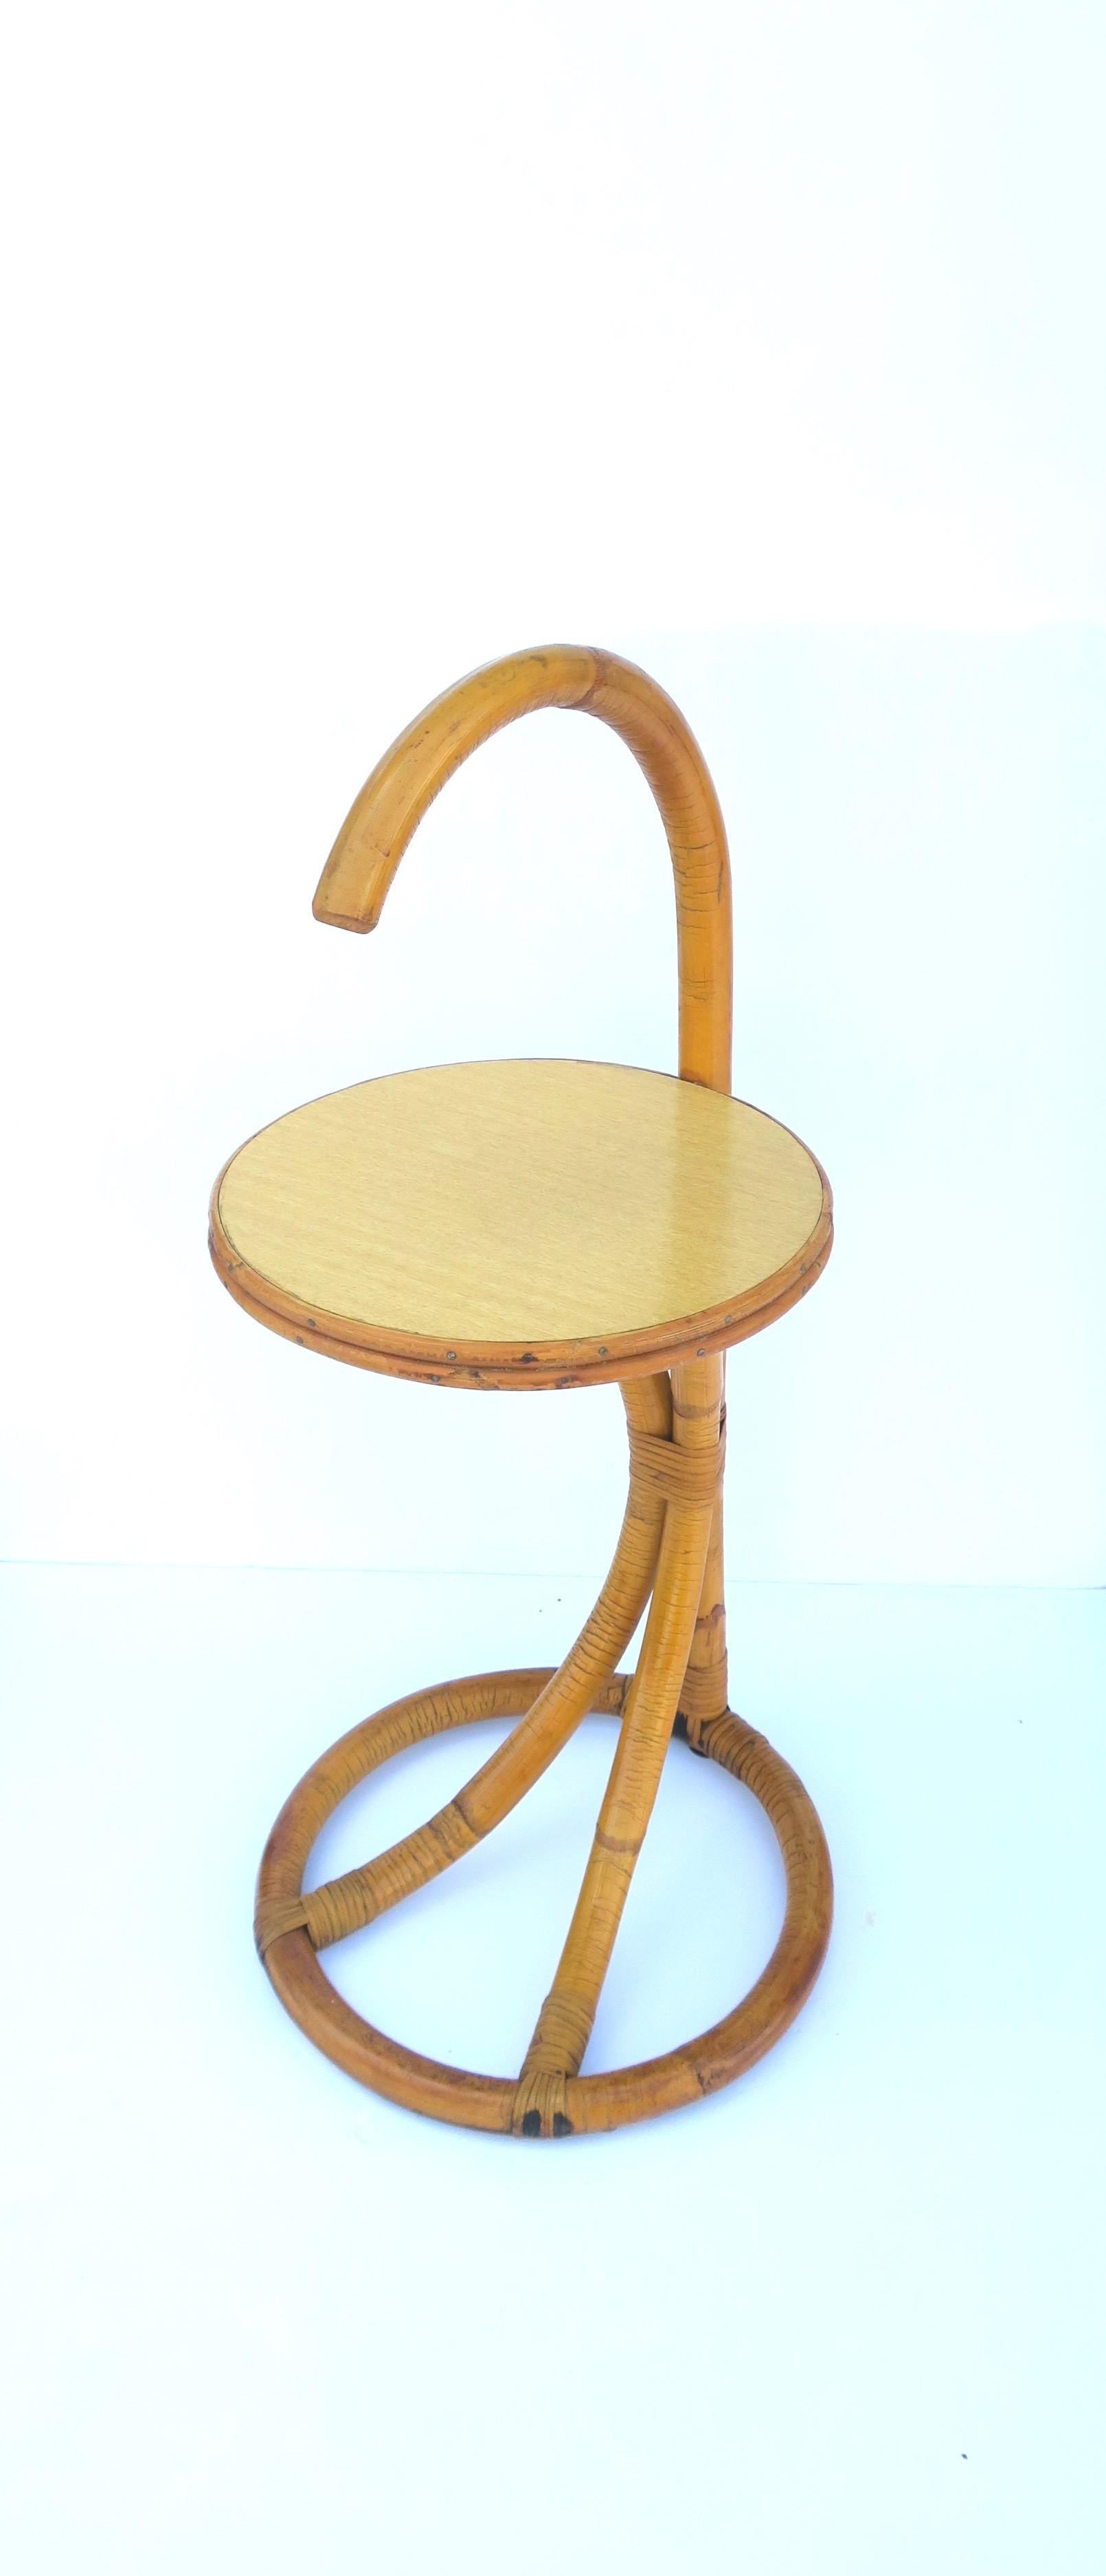 A wicker rattan side drinks table, circa mid-20th century. Table is wicker wrapped rattan with laminate tabletop. A great table for indoors or outdoors, patio, pool, etc. (I wouldn't leave table out during inclement weather.) A convenient table to